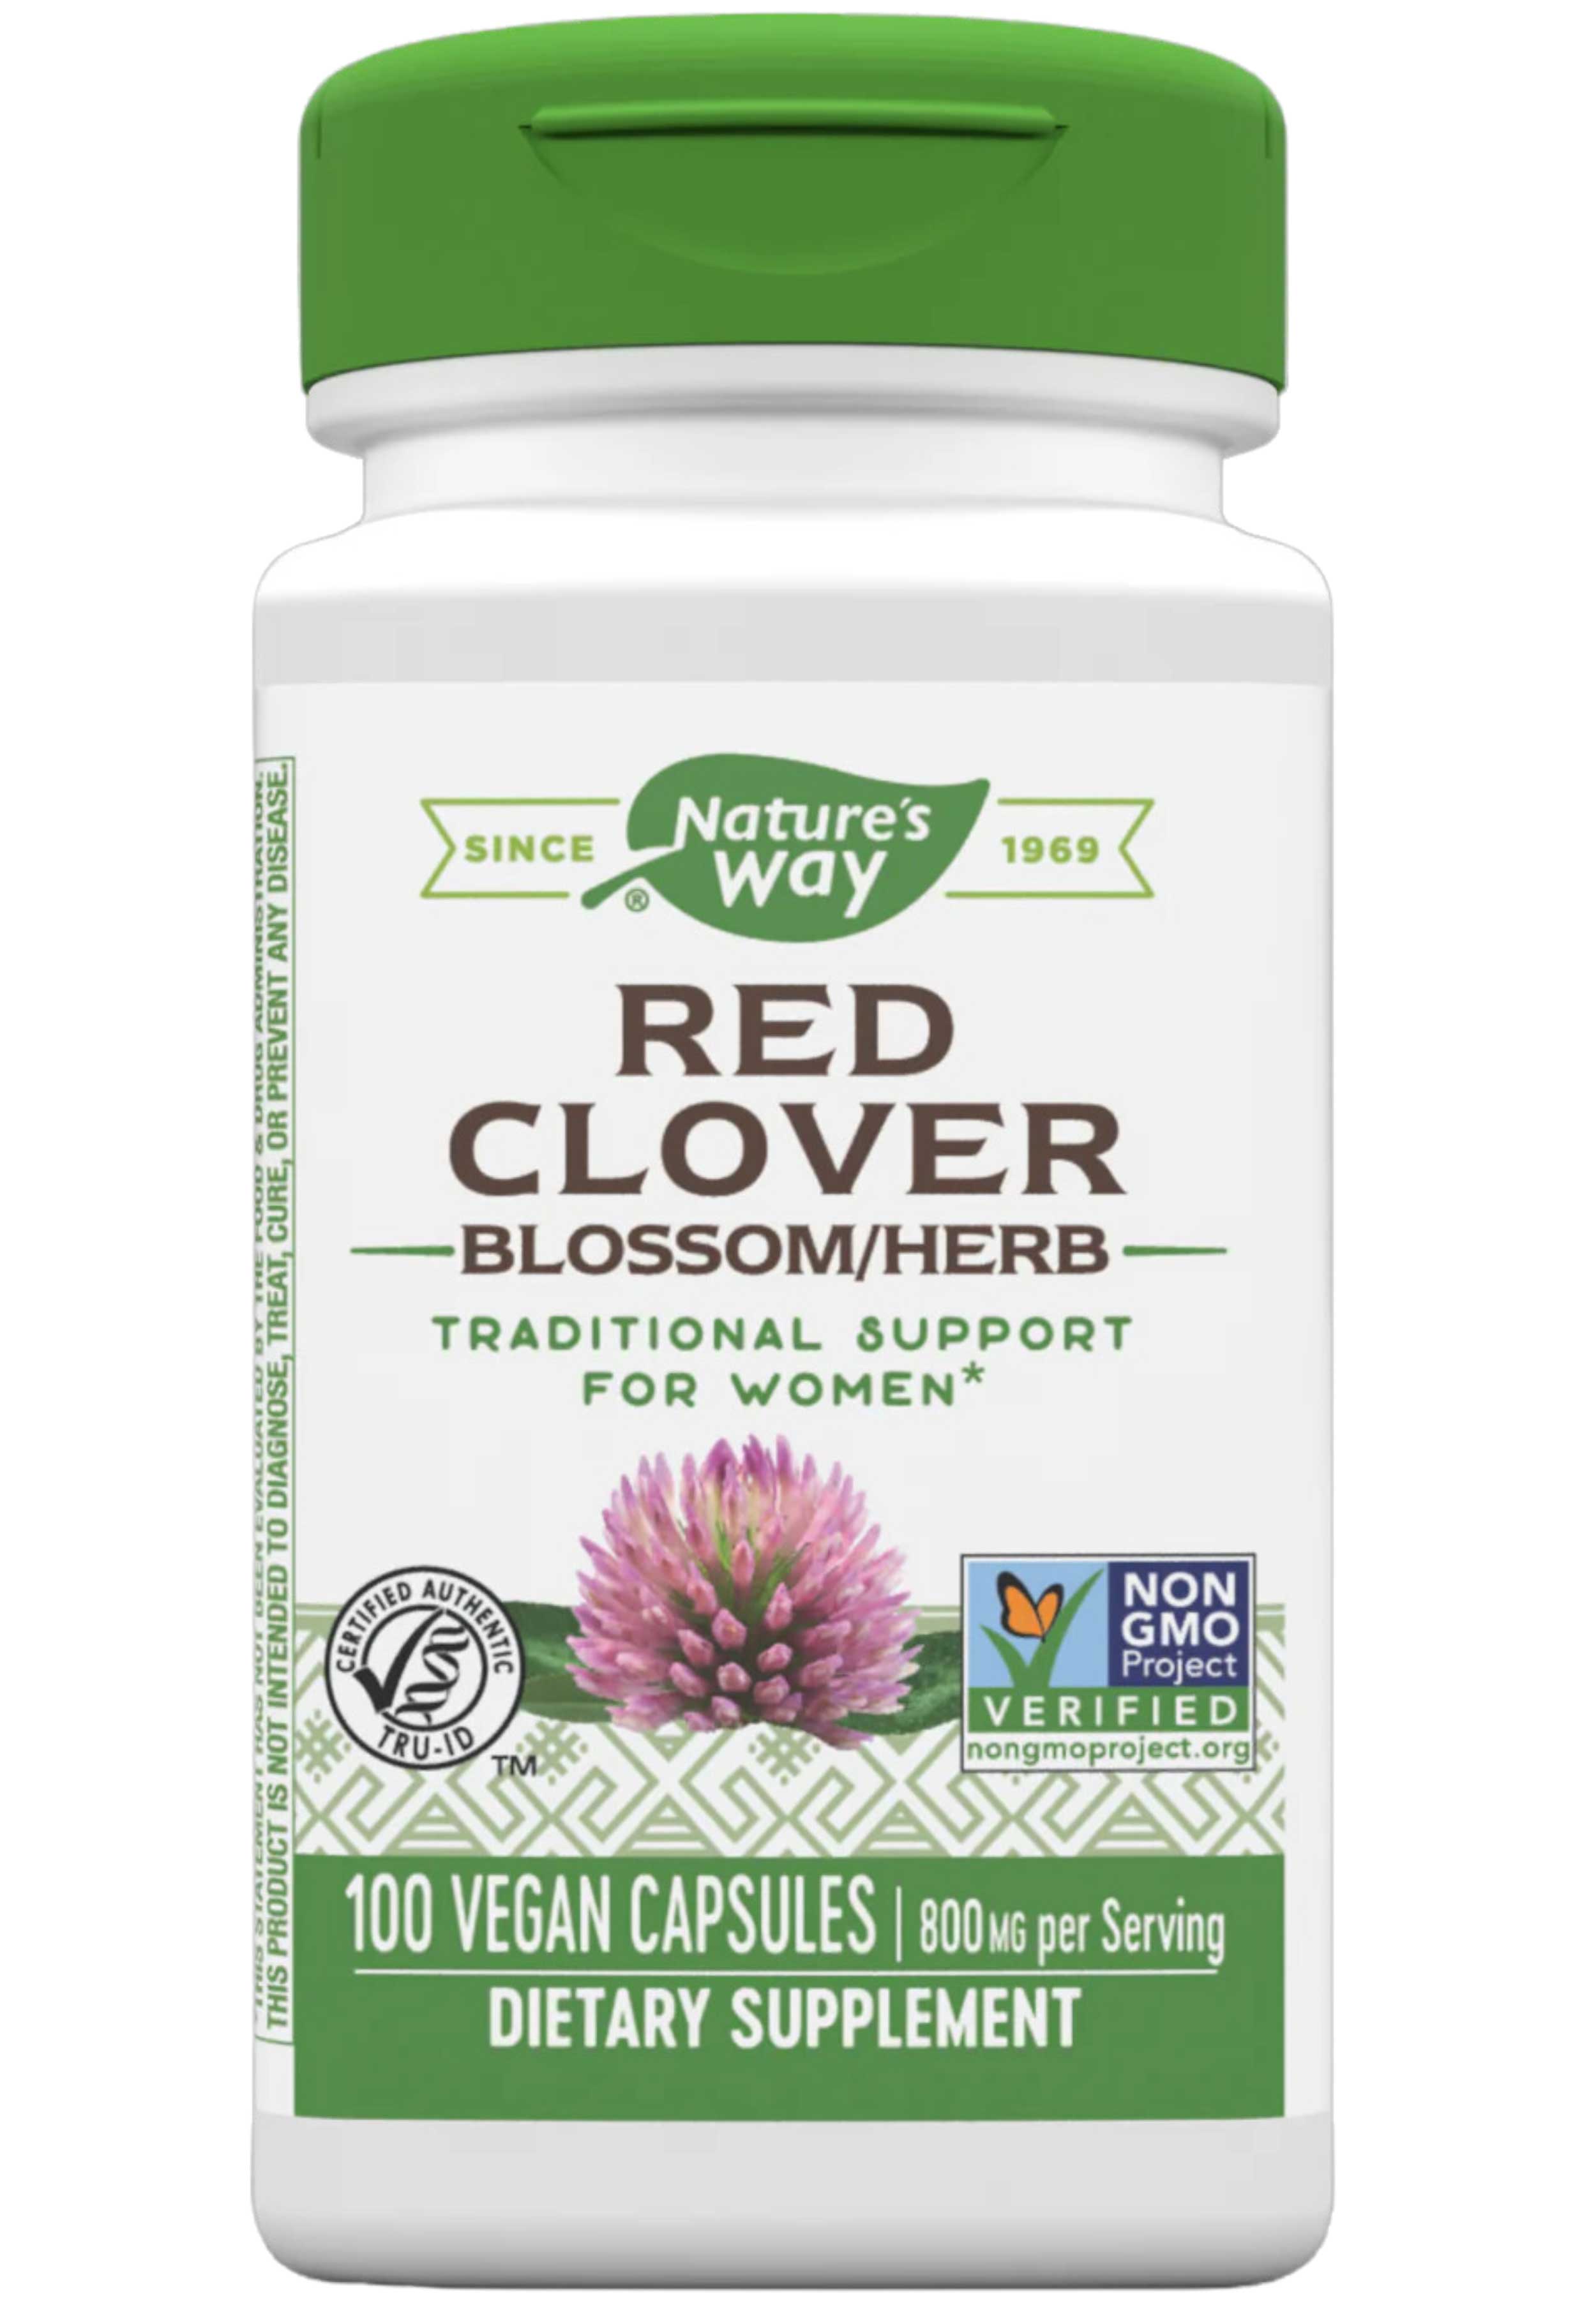 Nature's Way Red Clover Blossom/Herb